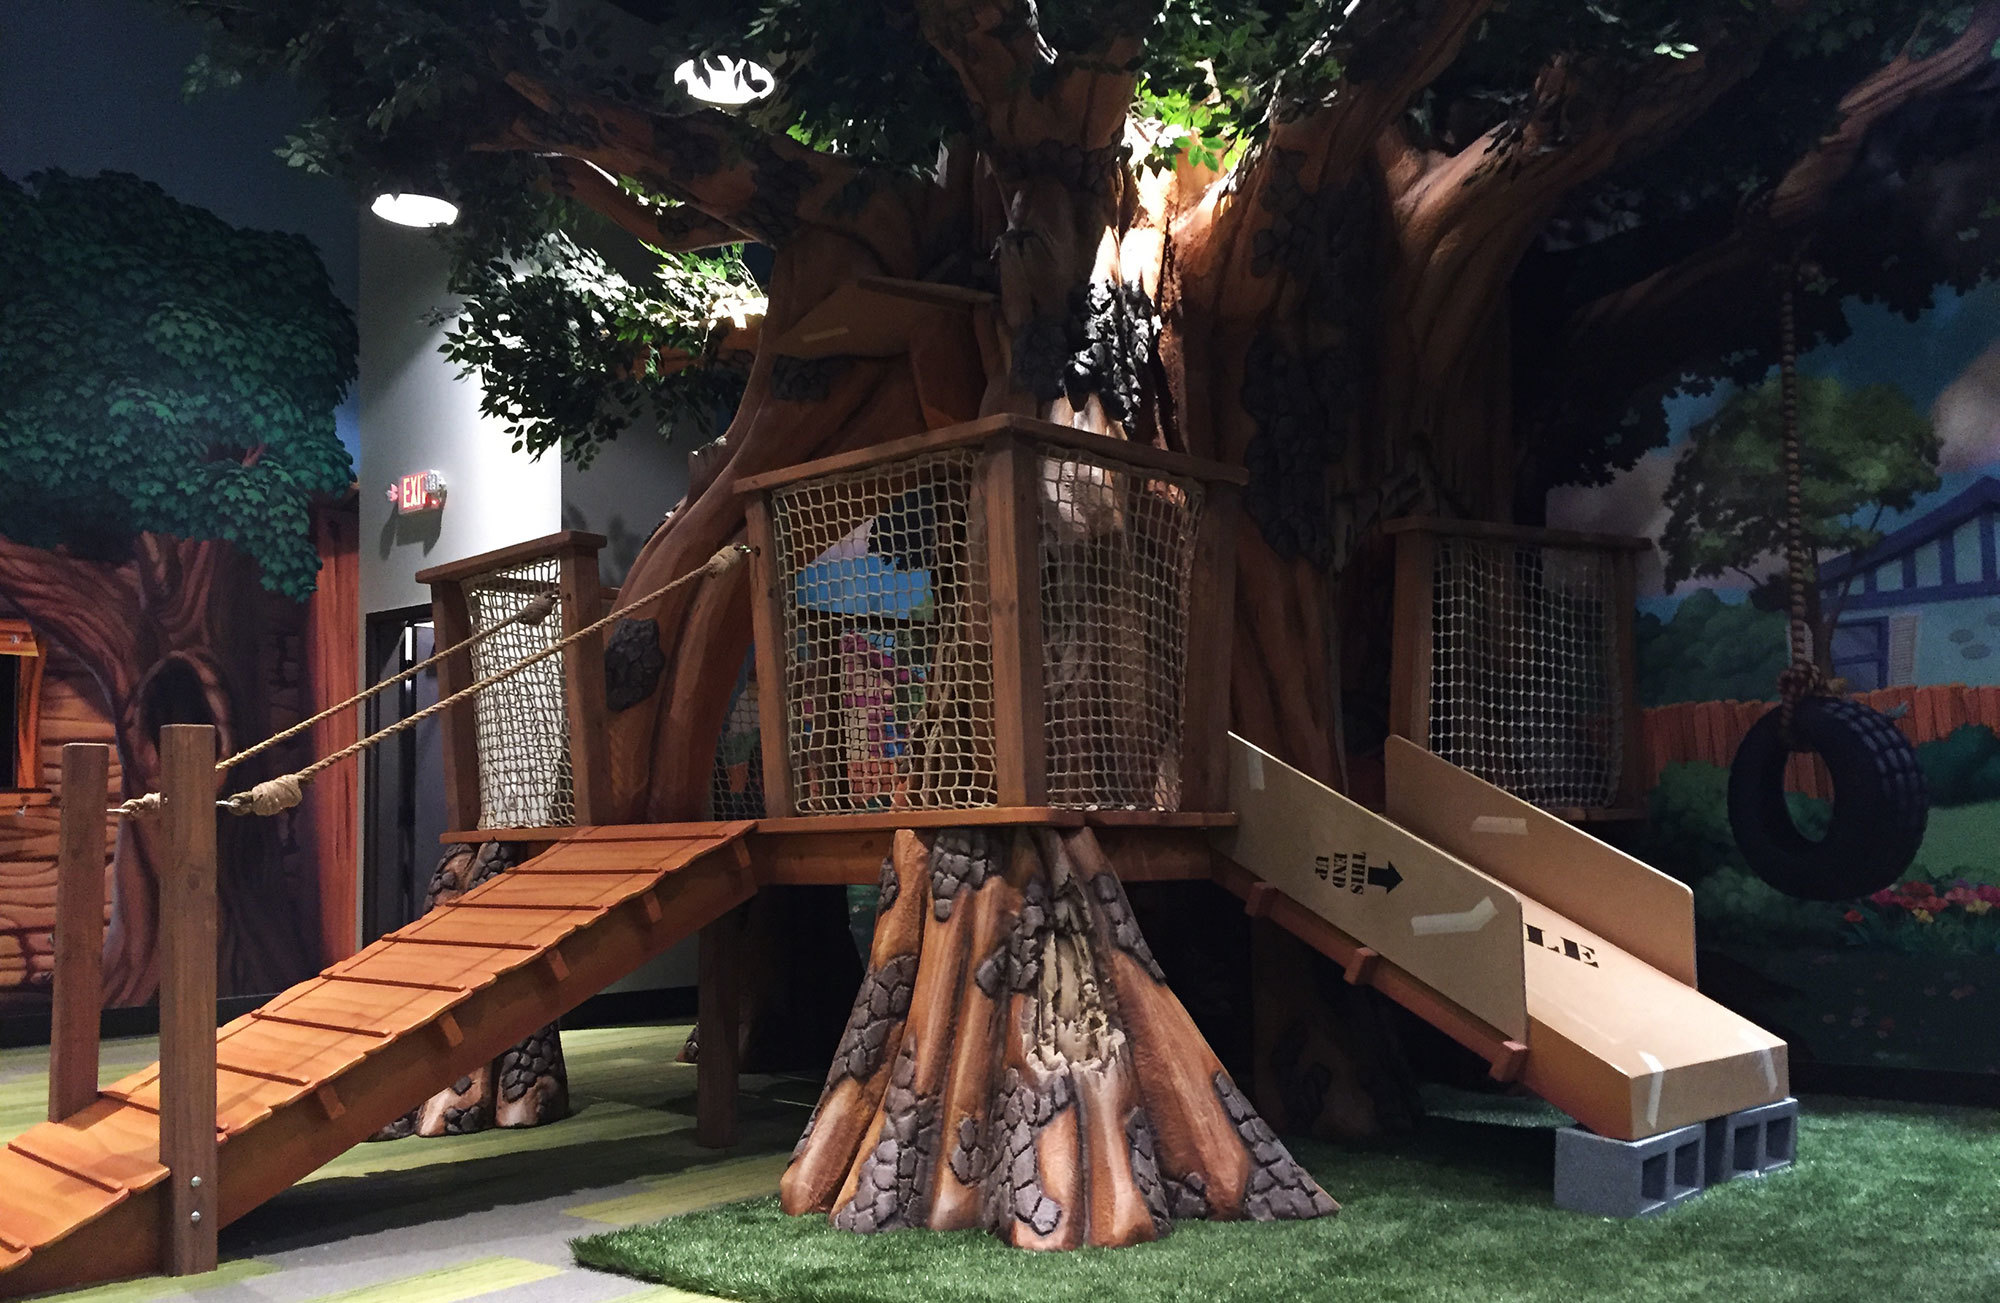 3D Treehouse Slide and Play Area at Christ Fellowship Church